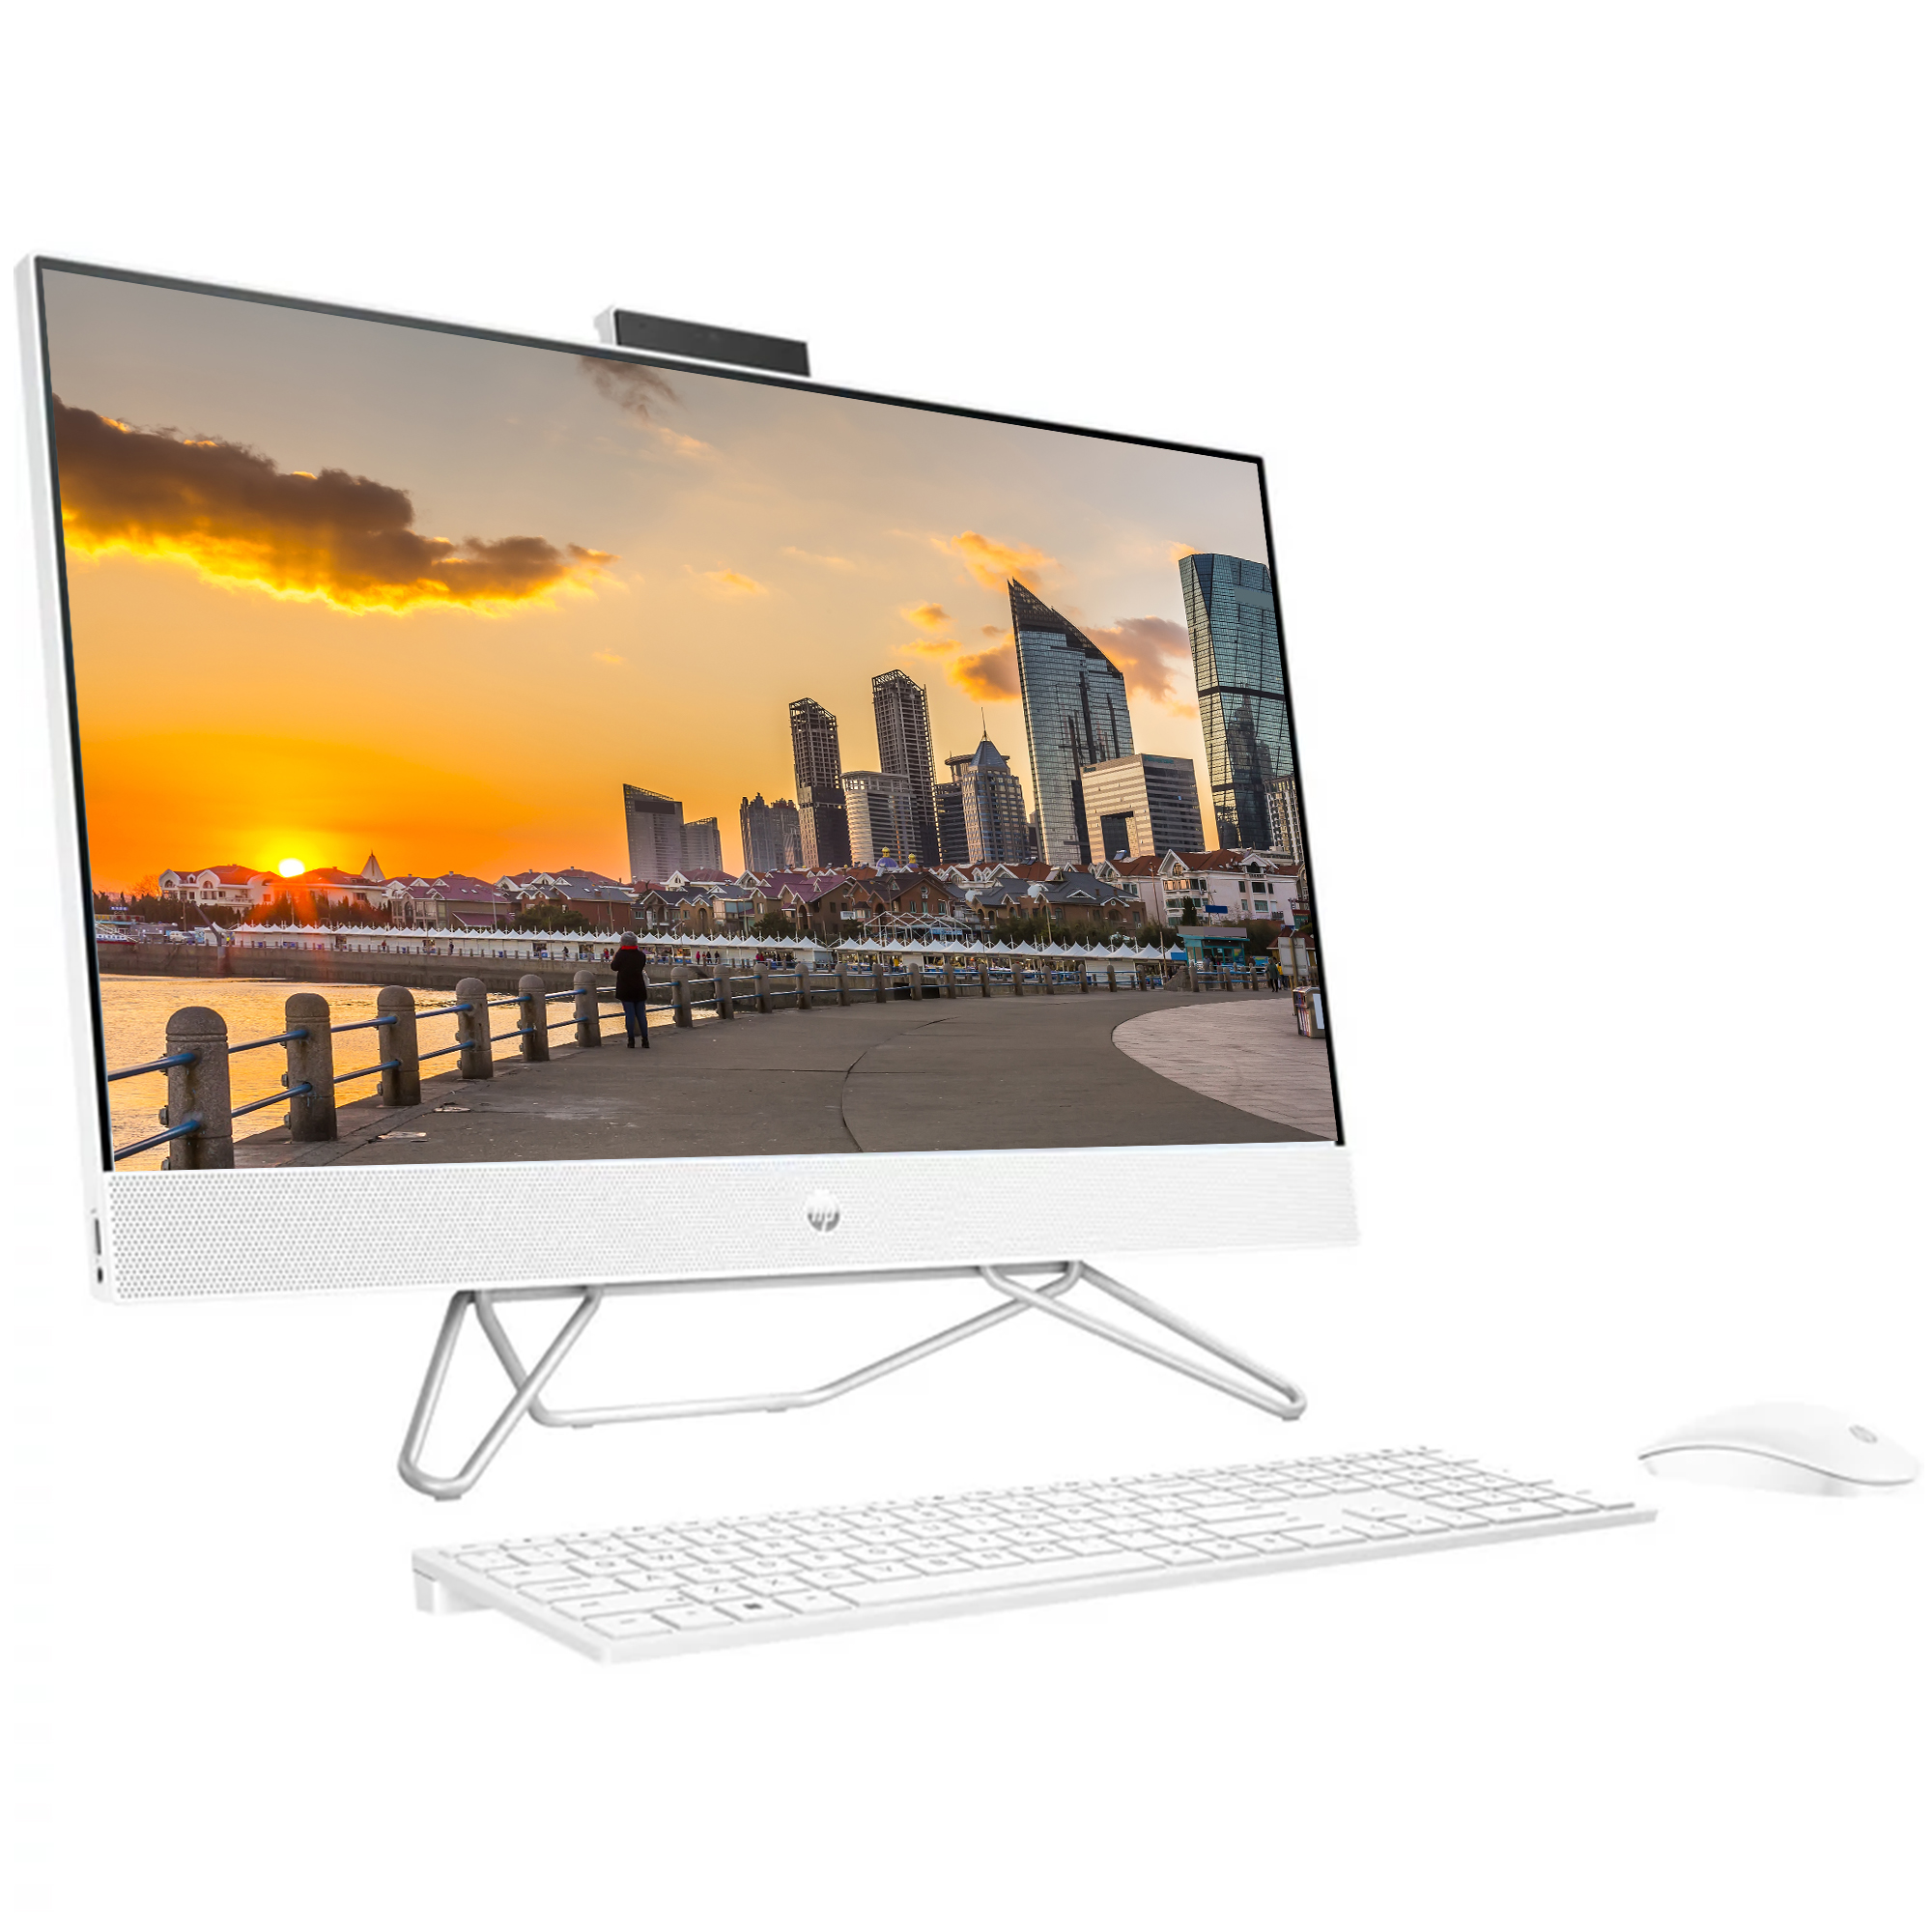 HP 27" FHD Touchscreen All-in-One [Windows 11 Pro] Business Desktop Computer PC, 8-Core AMD Ryzen 7 5700U(up to 4.3 GHz), 32GB RAM, 2TB PCIe SSD, Wi-Fi, Bluetooth, Wired Keyboard & Mouse - image 2 of 6